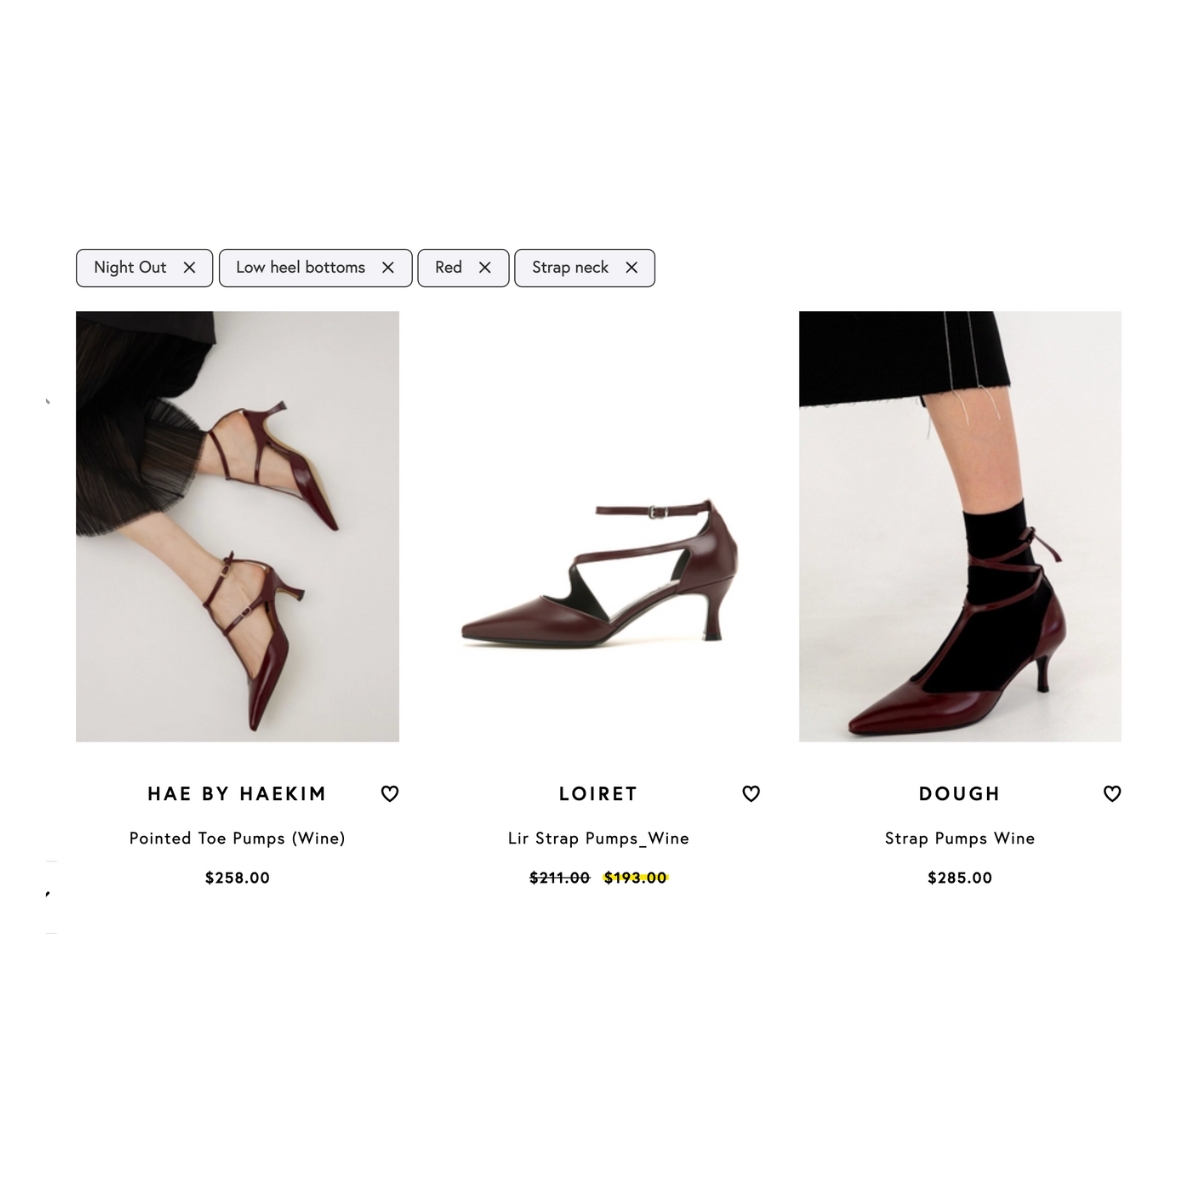 Occasion filters combined with color and heel product attributes by YesPlz AI